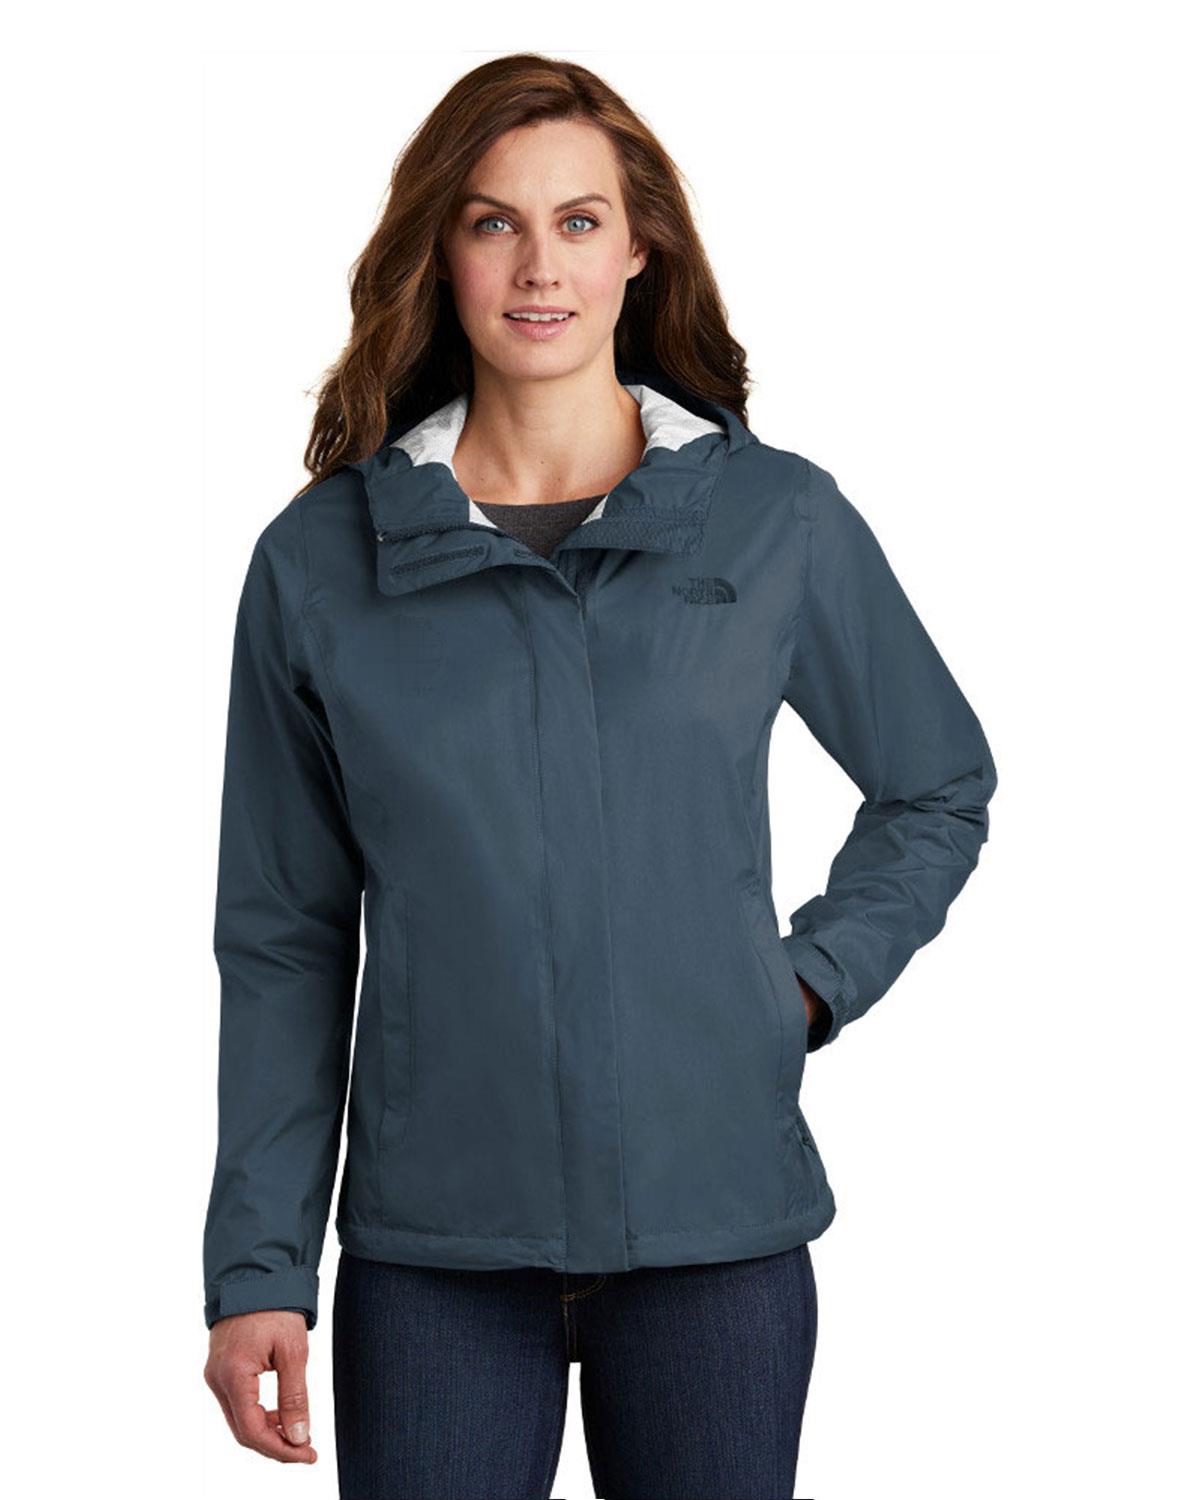 The North Face NF0A3LH5 Women Rain Jacket